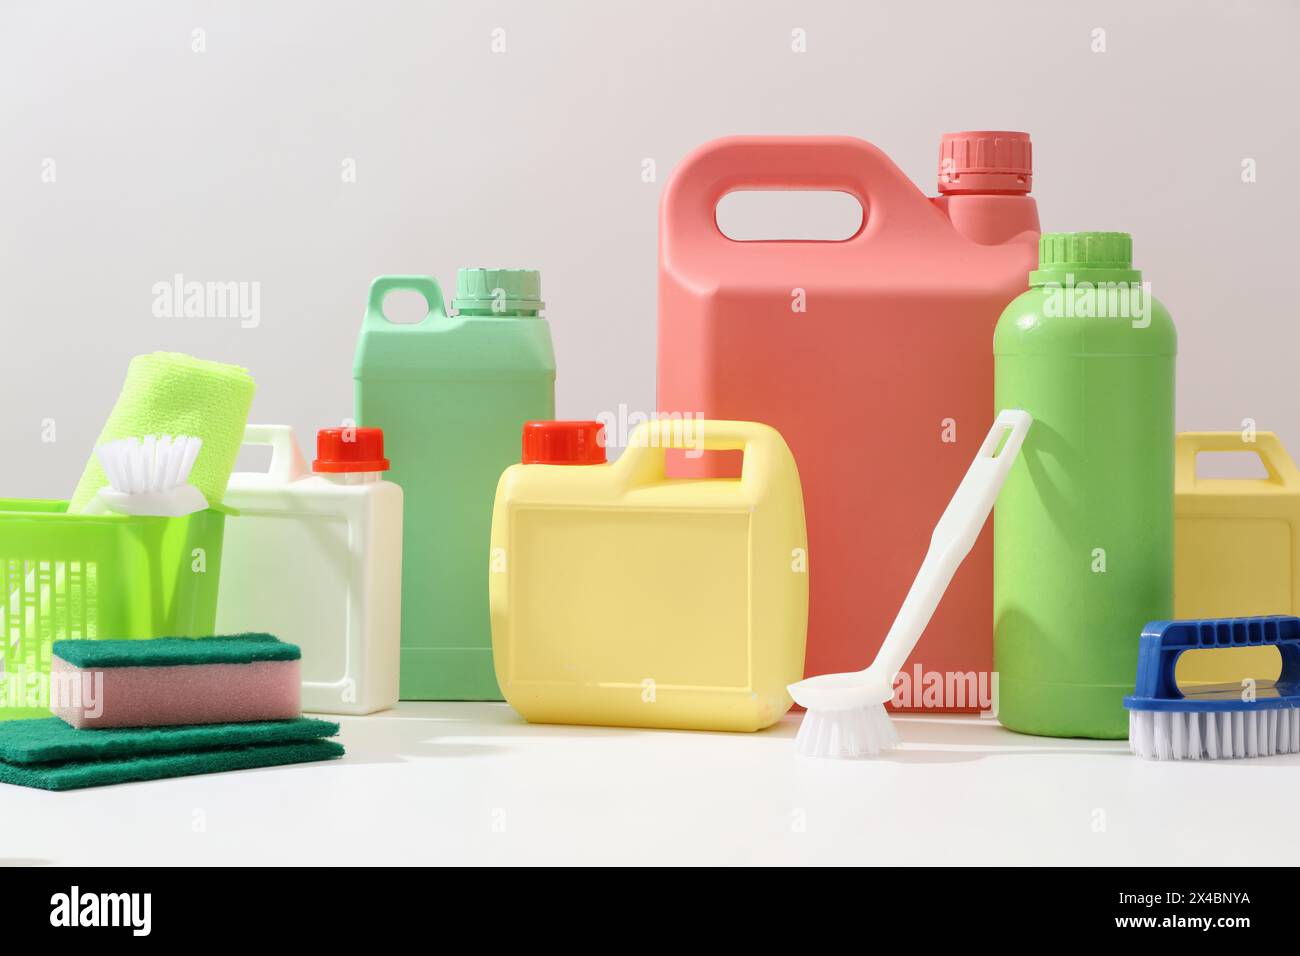 Front view of different bottle and canisters mockup of detergent product displayed on white background with cleaning tools. Housework and professional Stock Photo